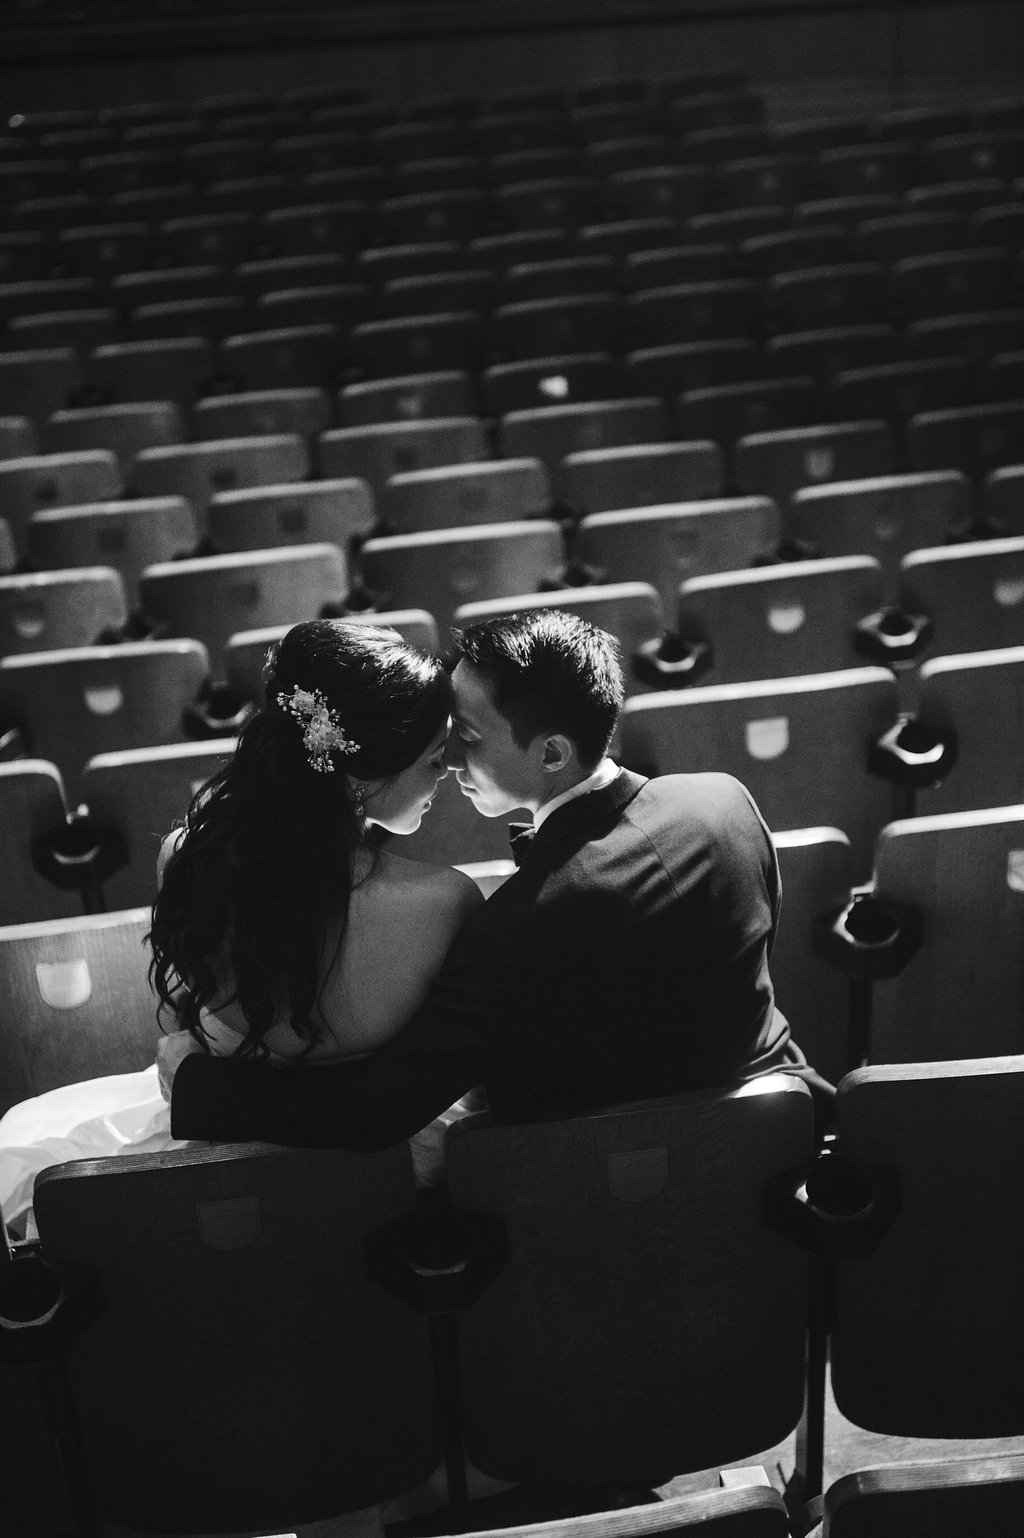 Bride and Groom Black and White Wedding Portrait Sitting in Theater | Tampa Bay Photographer Marc Edwards Photographs | Unique Downtown Tampa Wedding Venue The Straz Center